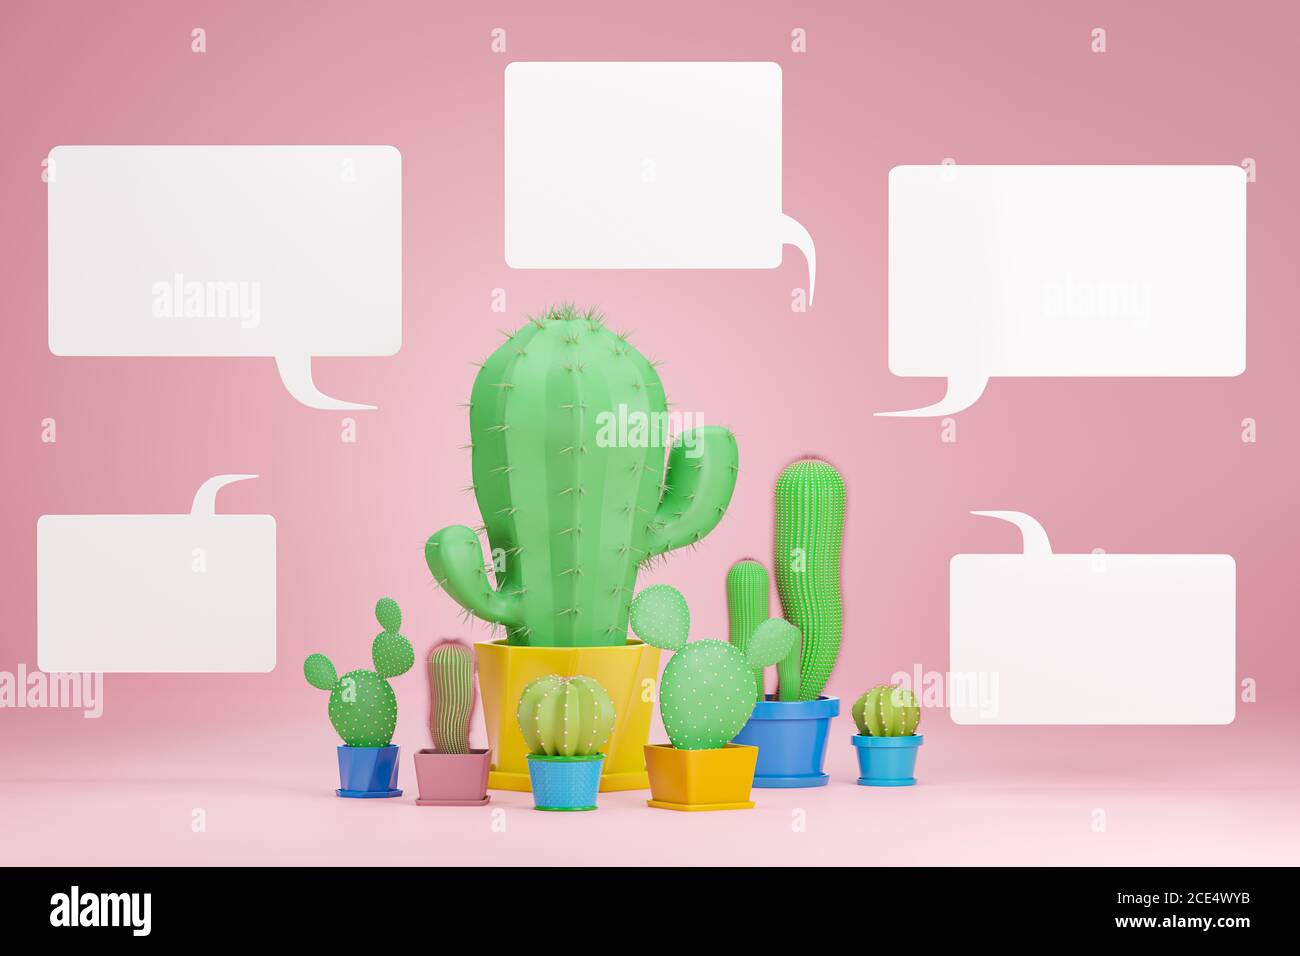 Set of cactus plants are placed in pink background on the center and have a white blank text box around it. The concept a group of people who love and Stock Photo